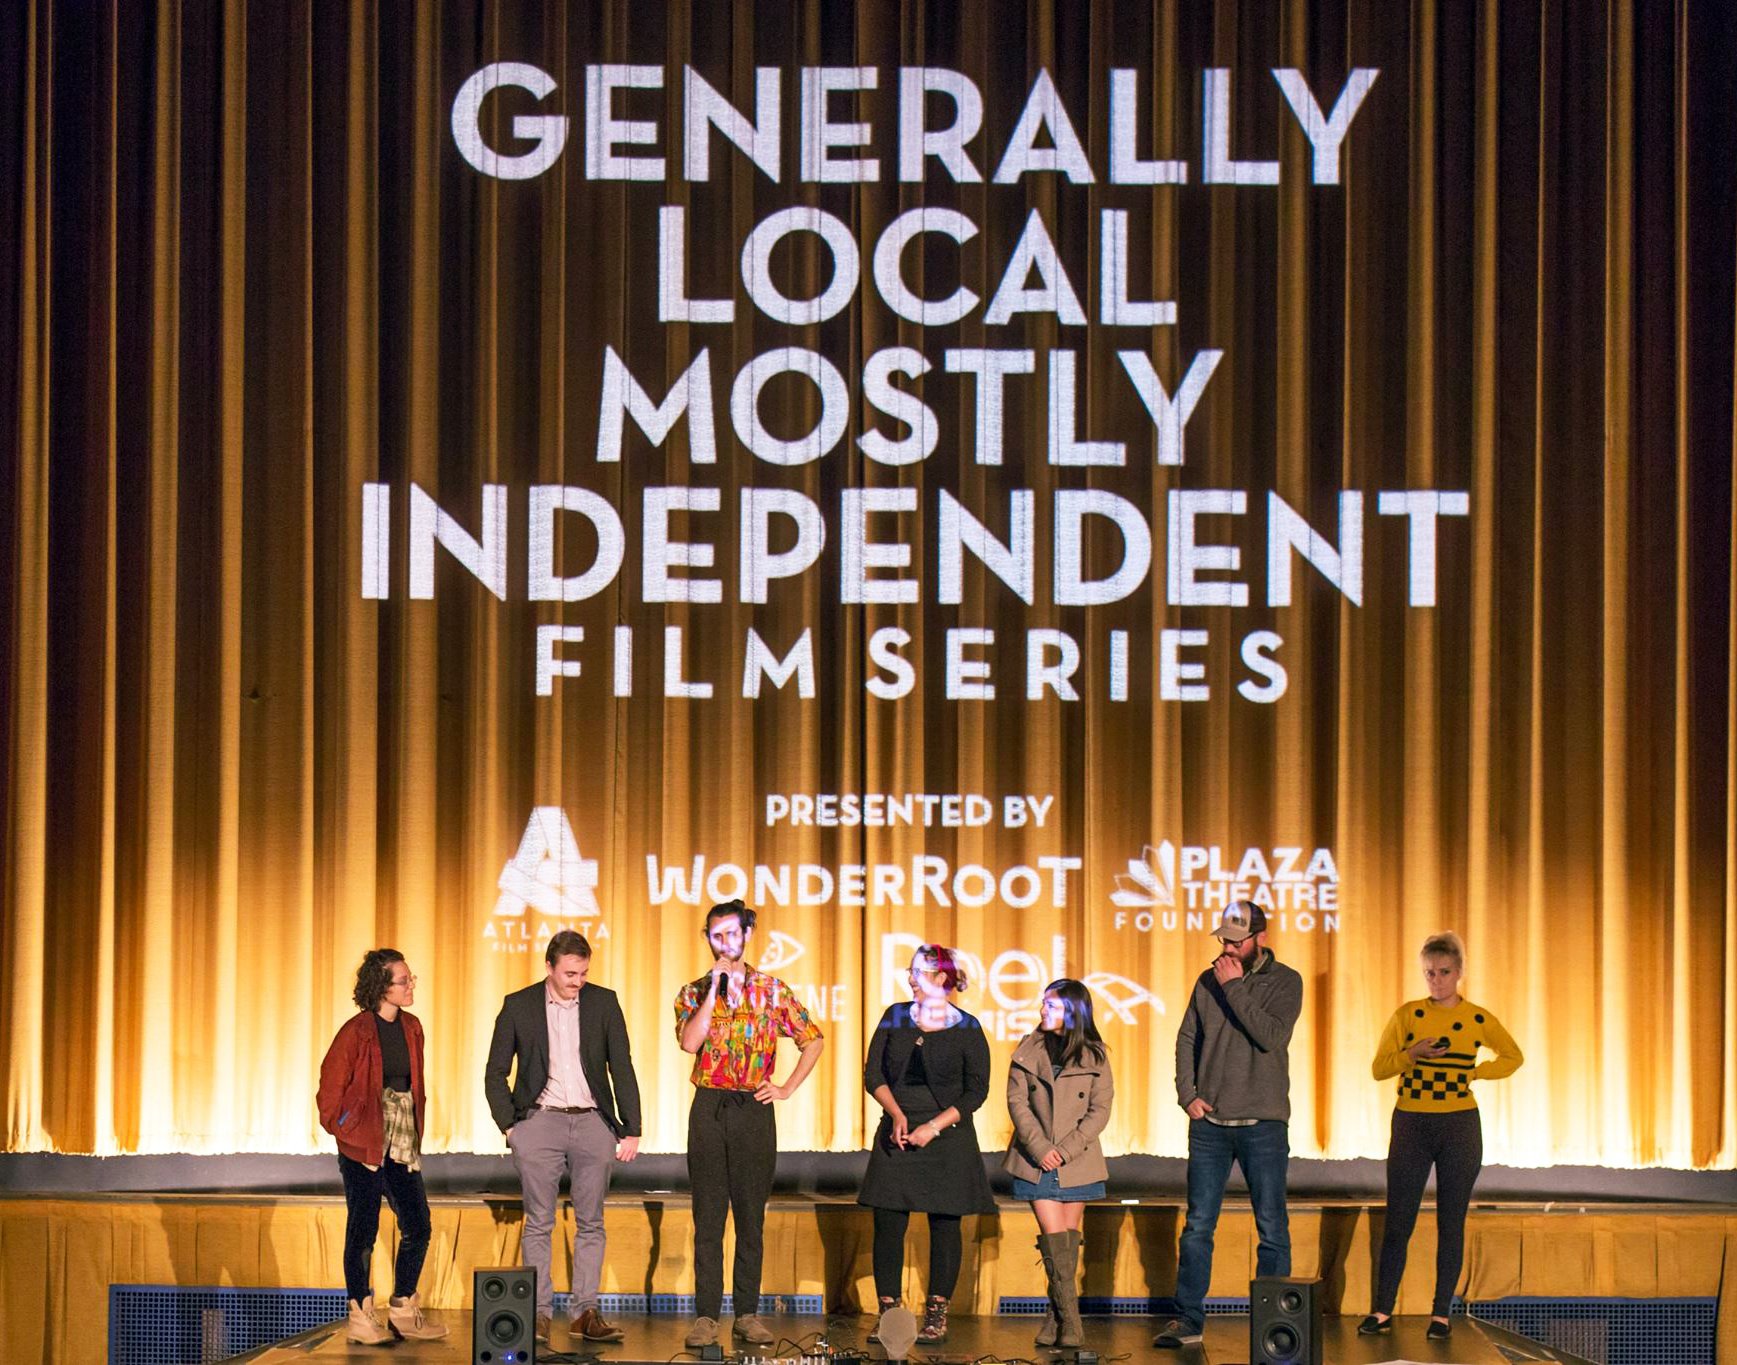 A group of people standing on a stage in front of a large screen that says “Generally Local Mostly Independent Film Series”. The people are facing the audience and wearing casual clothes. The stage is lit with yellow and orange lights.